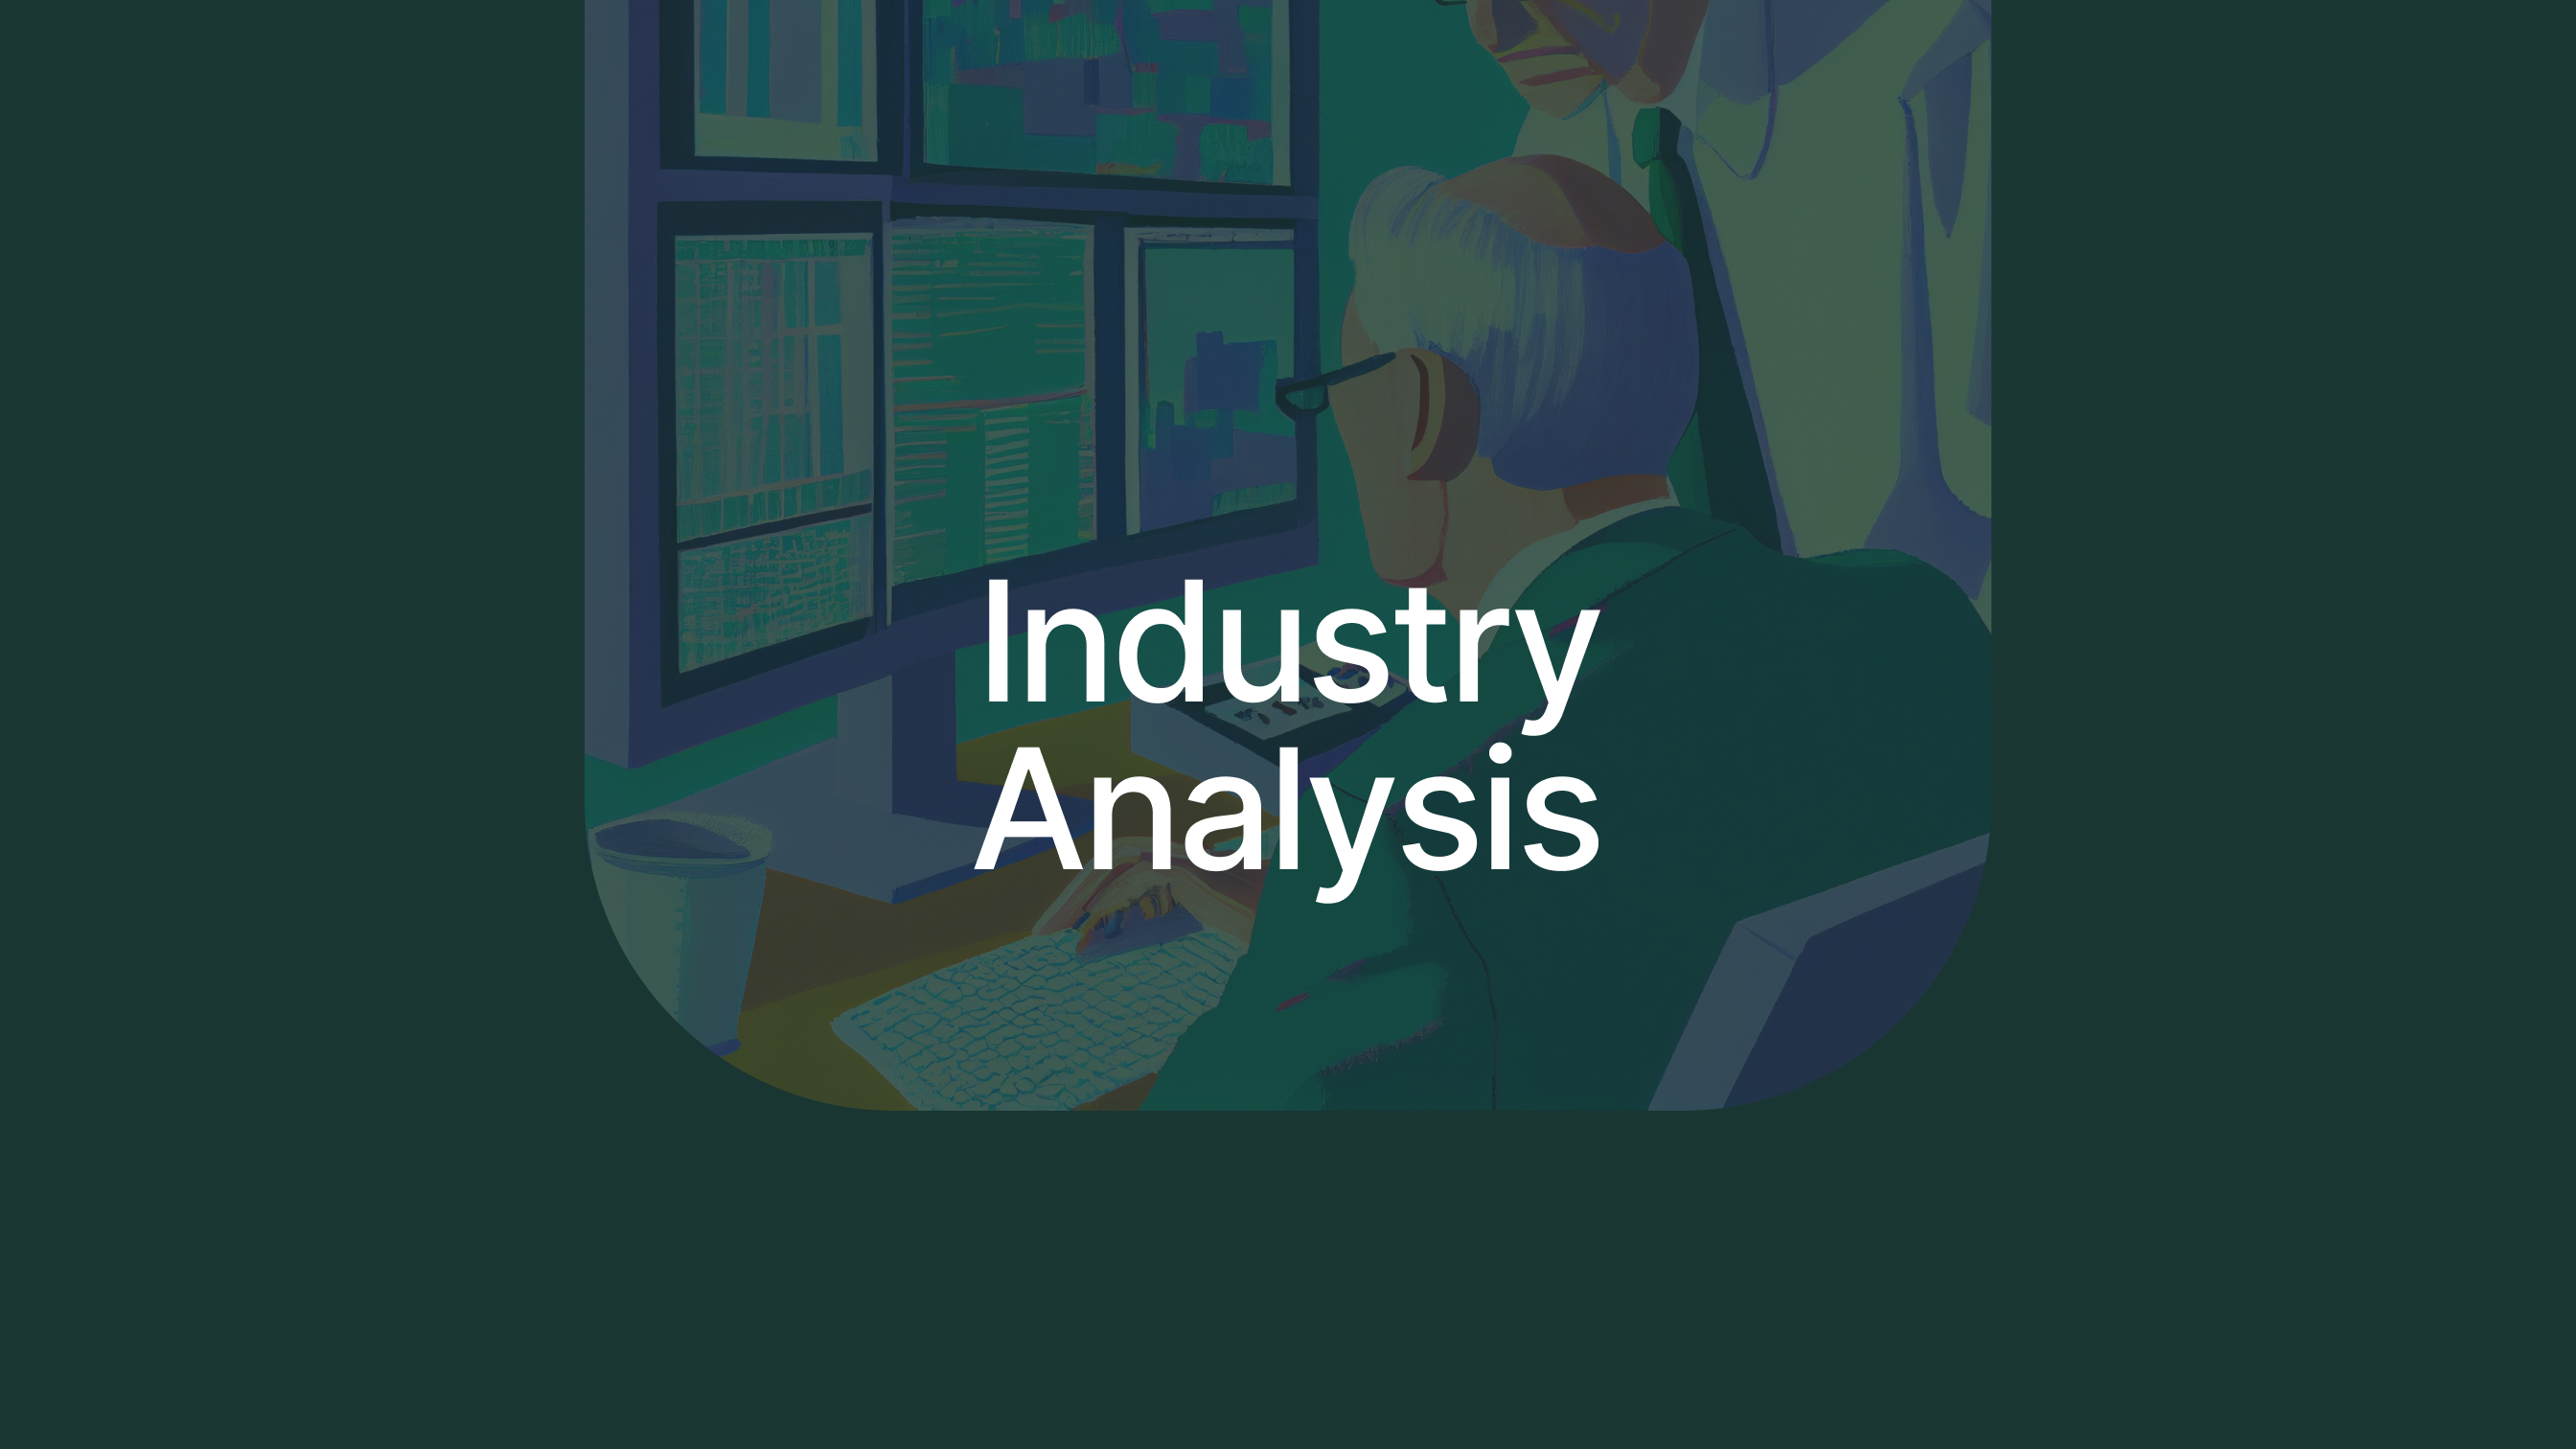 Industry Analysis - How to identify lucrative sectors